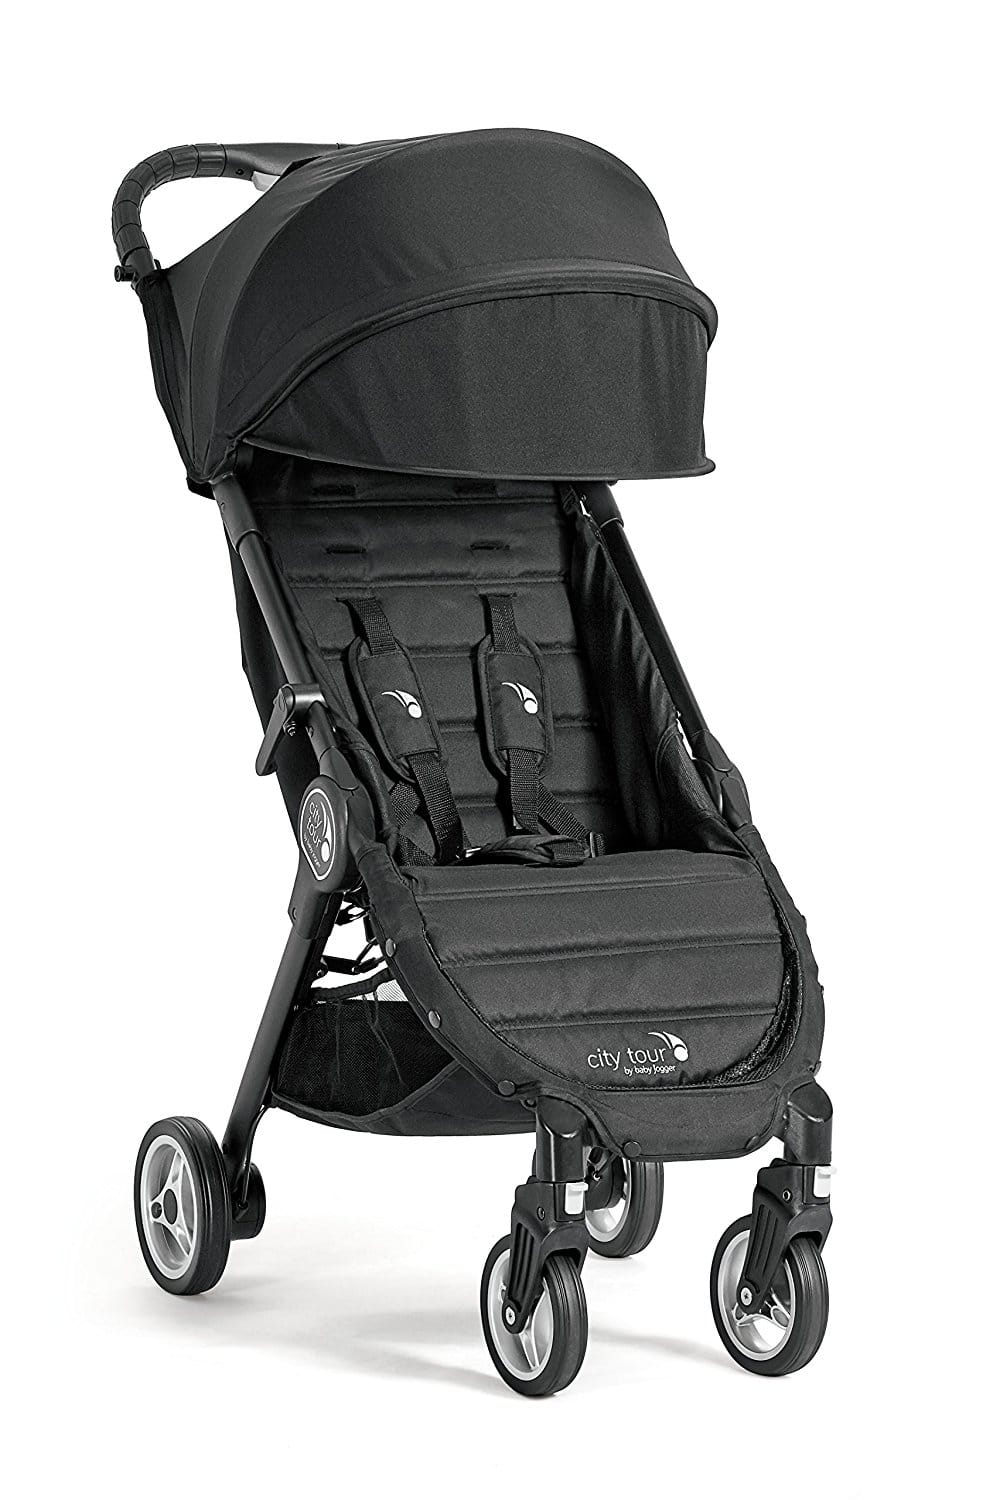 the most compact baby stroller